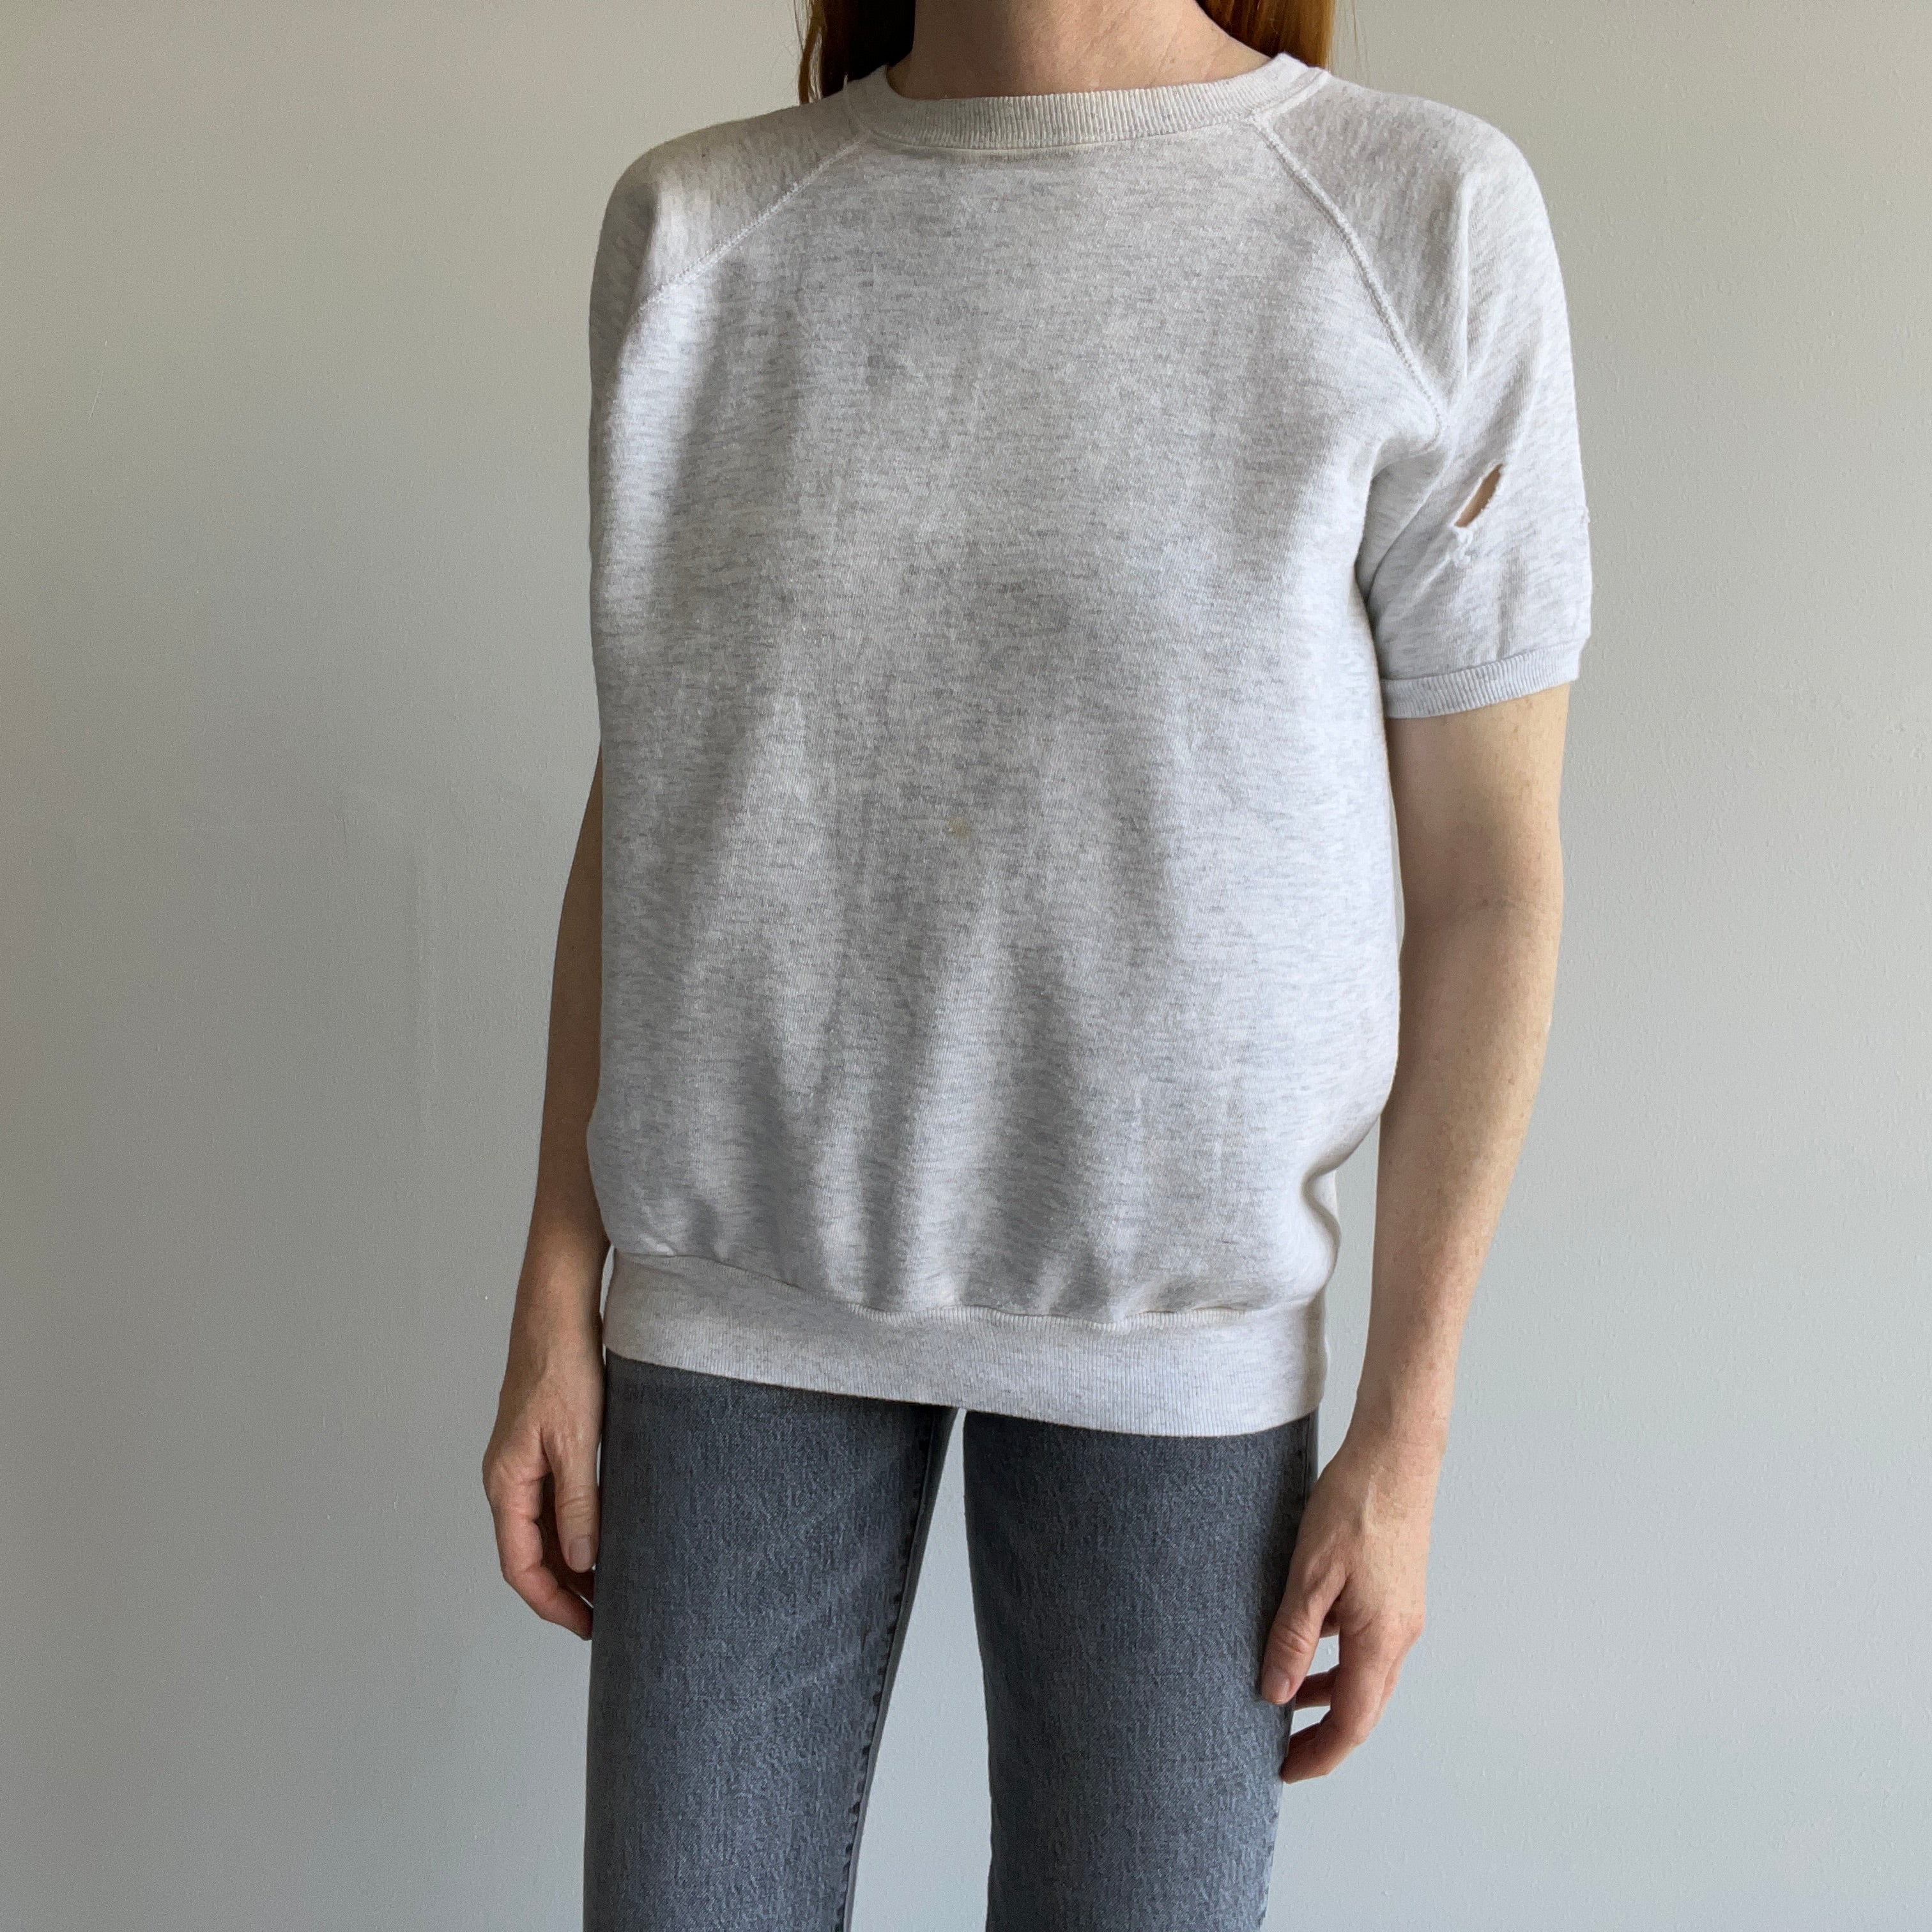 1980s Light Gray Blank Warm Up Sweatshirt with a hole in the Sleeve